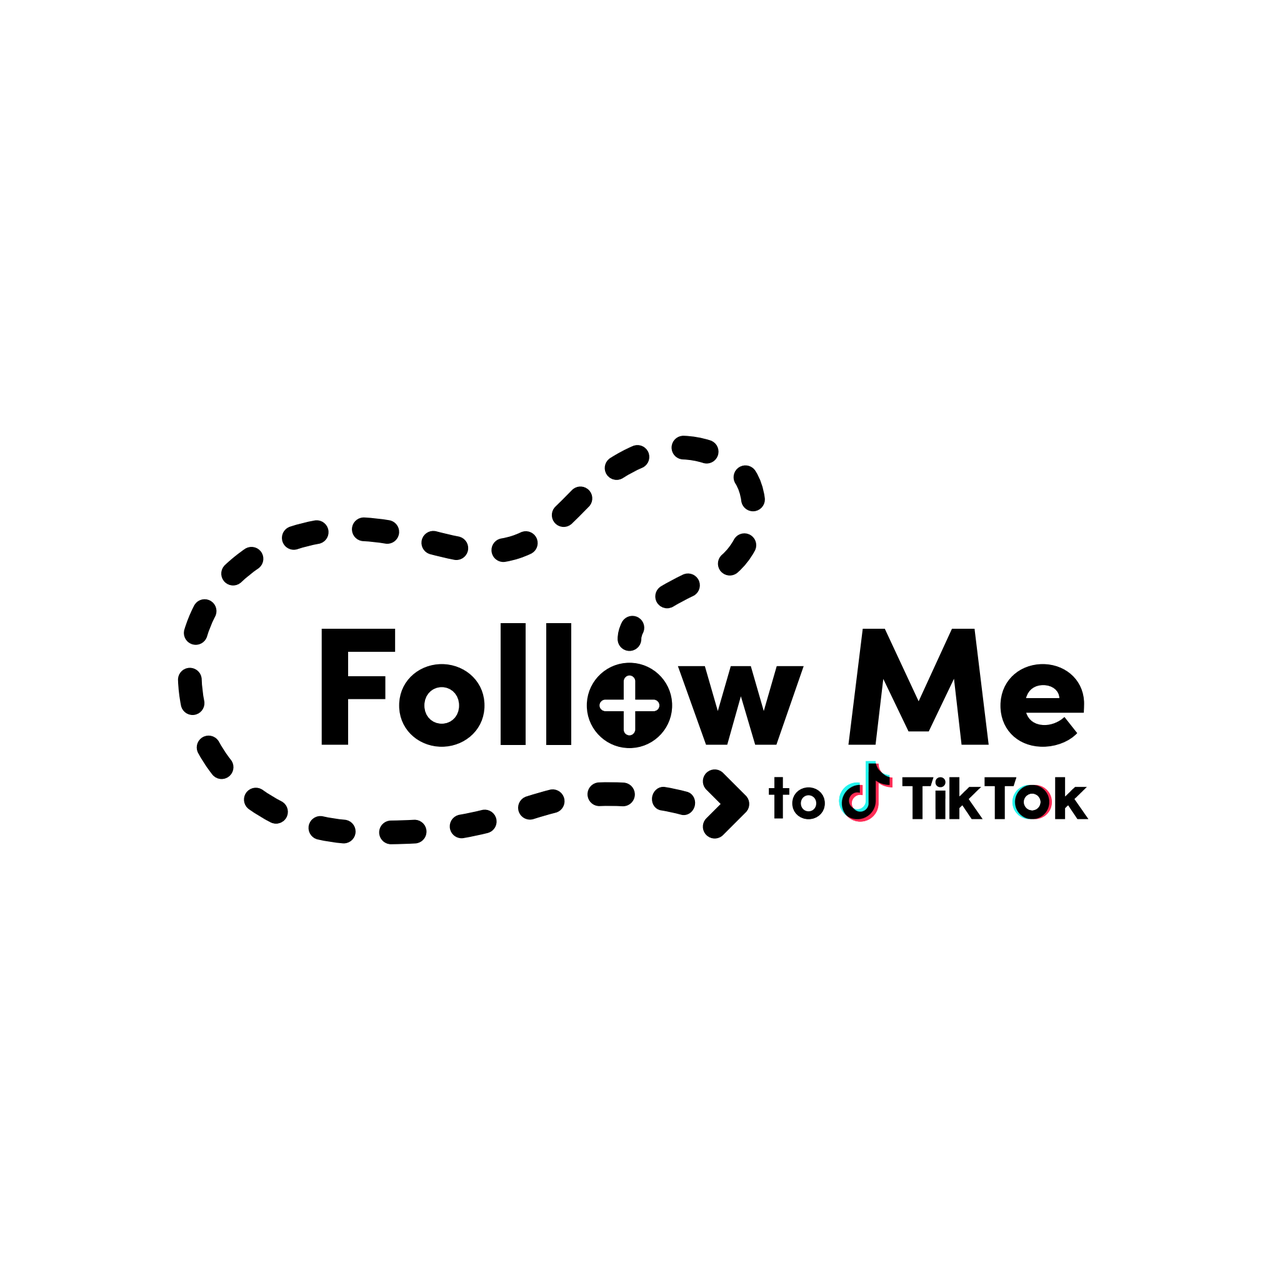 Introducing Follow Me to help small businesses build community and ...